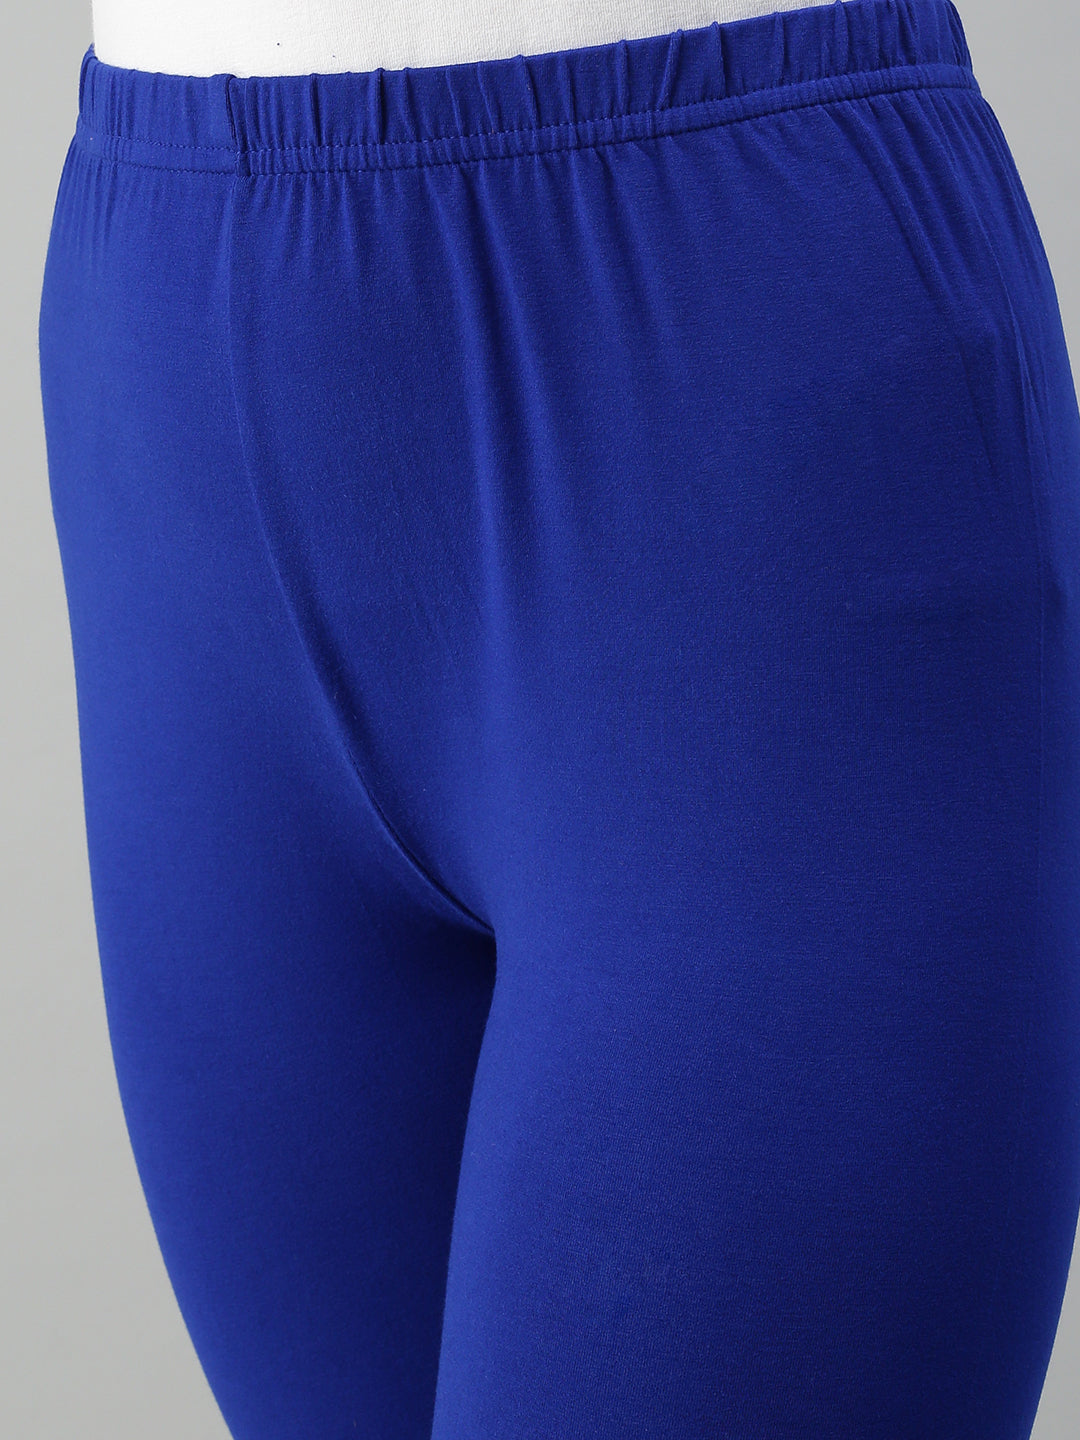 Get Your Royal Blue Ankle Leggings from Prisma